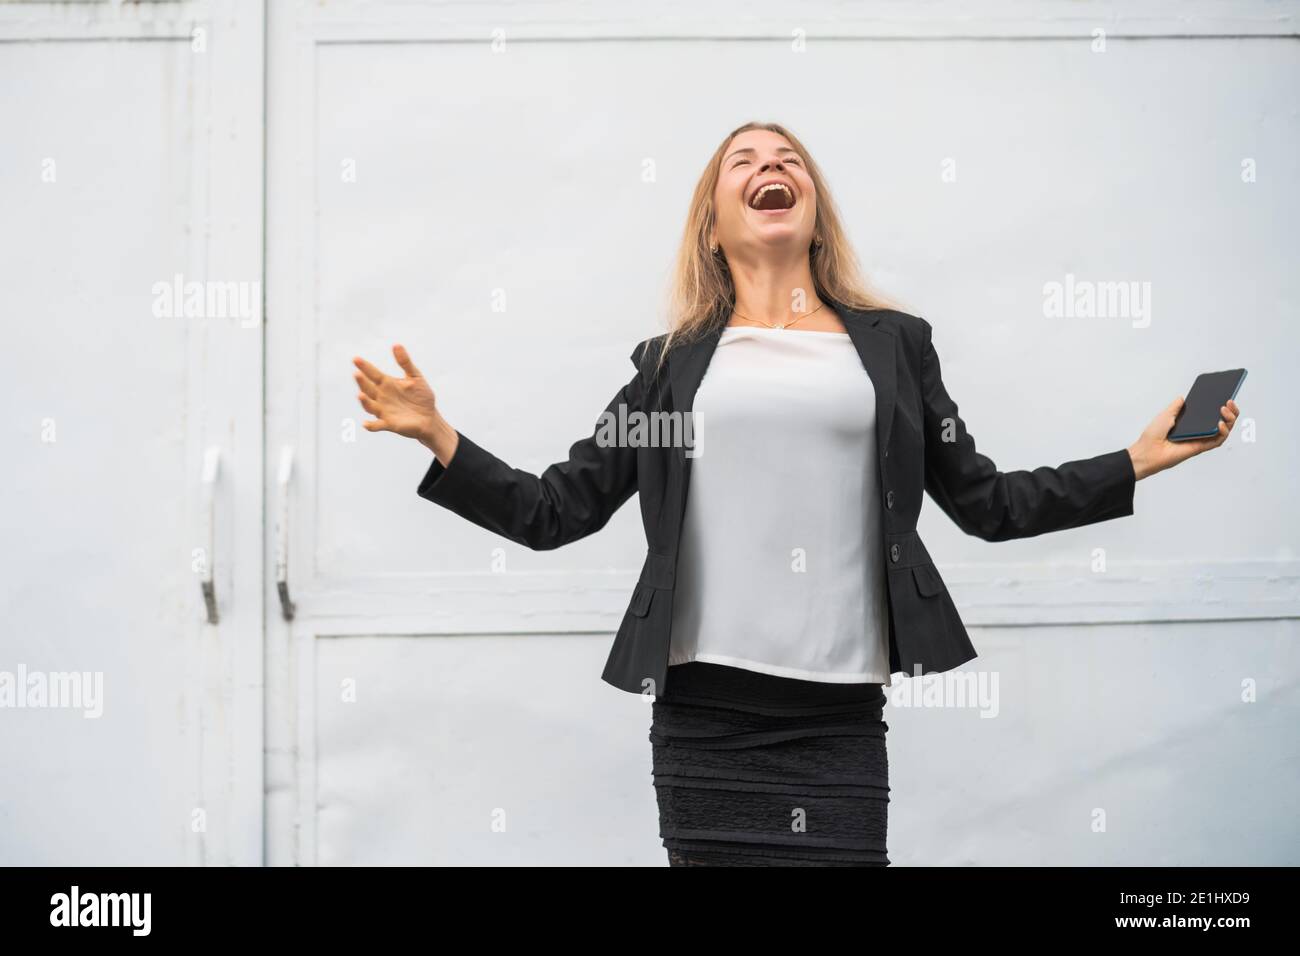 Outdoor portrait of ecstatic modern businesswoman who is joyful. She is holding smartphone. Stock Photo